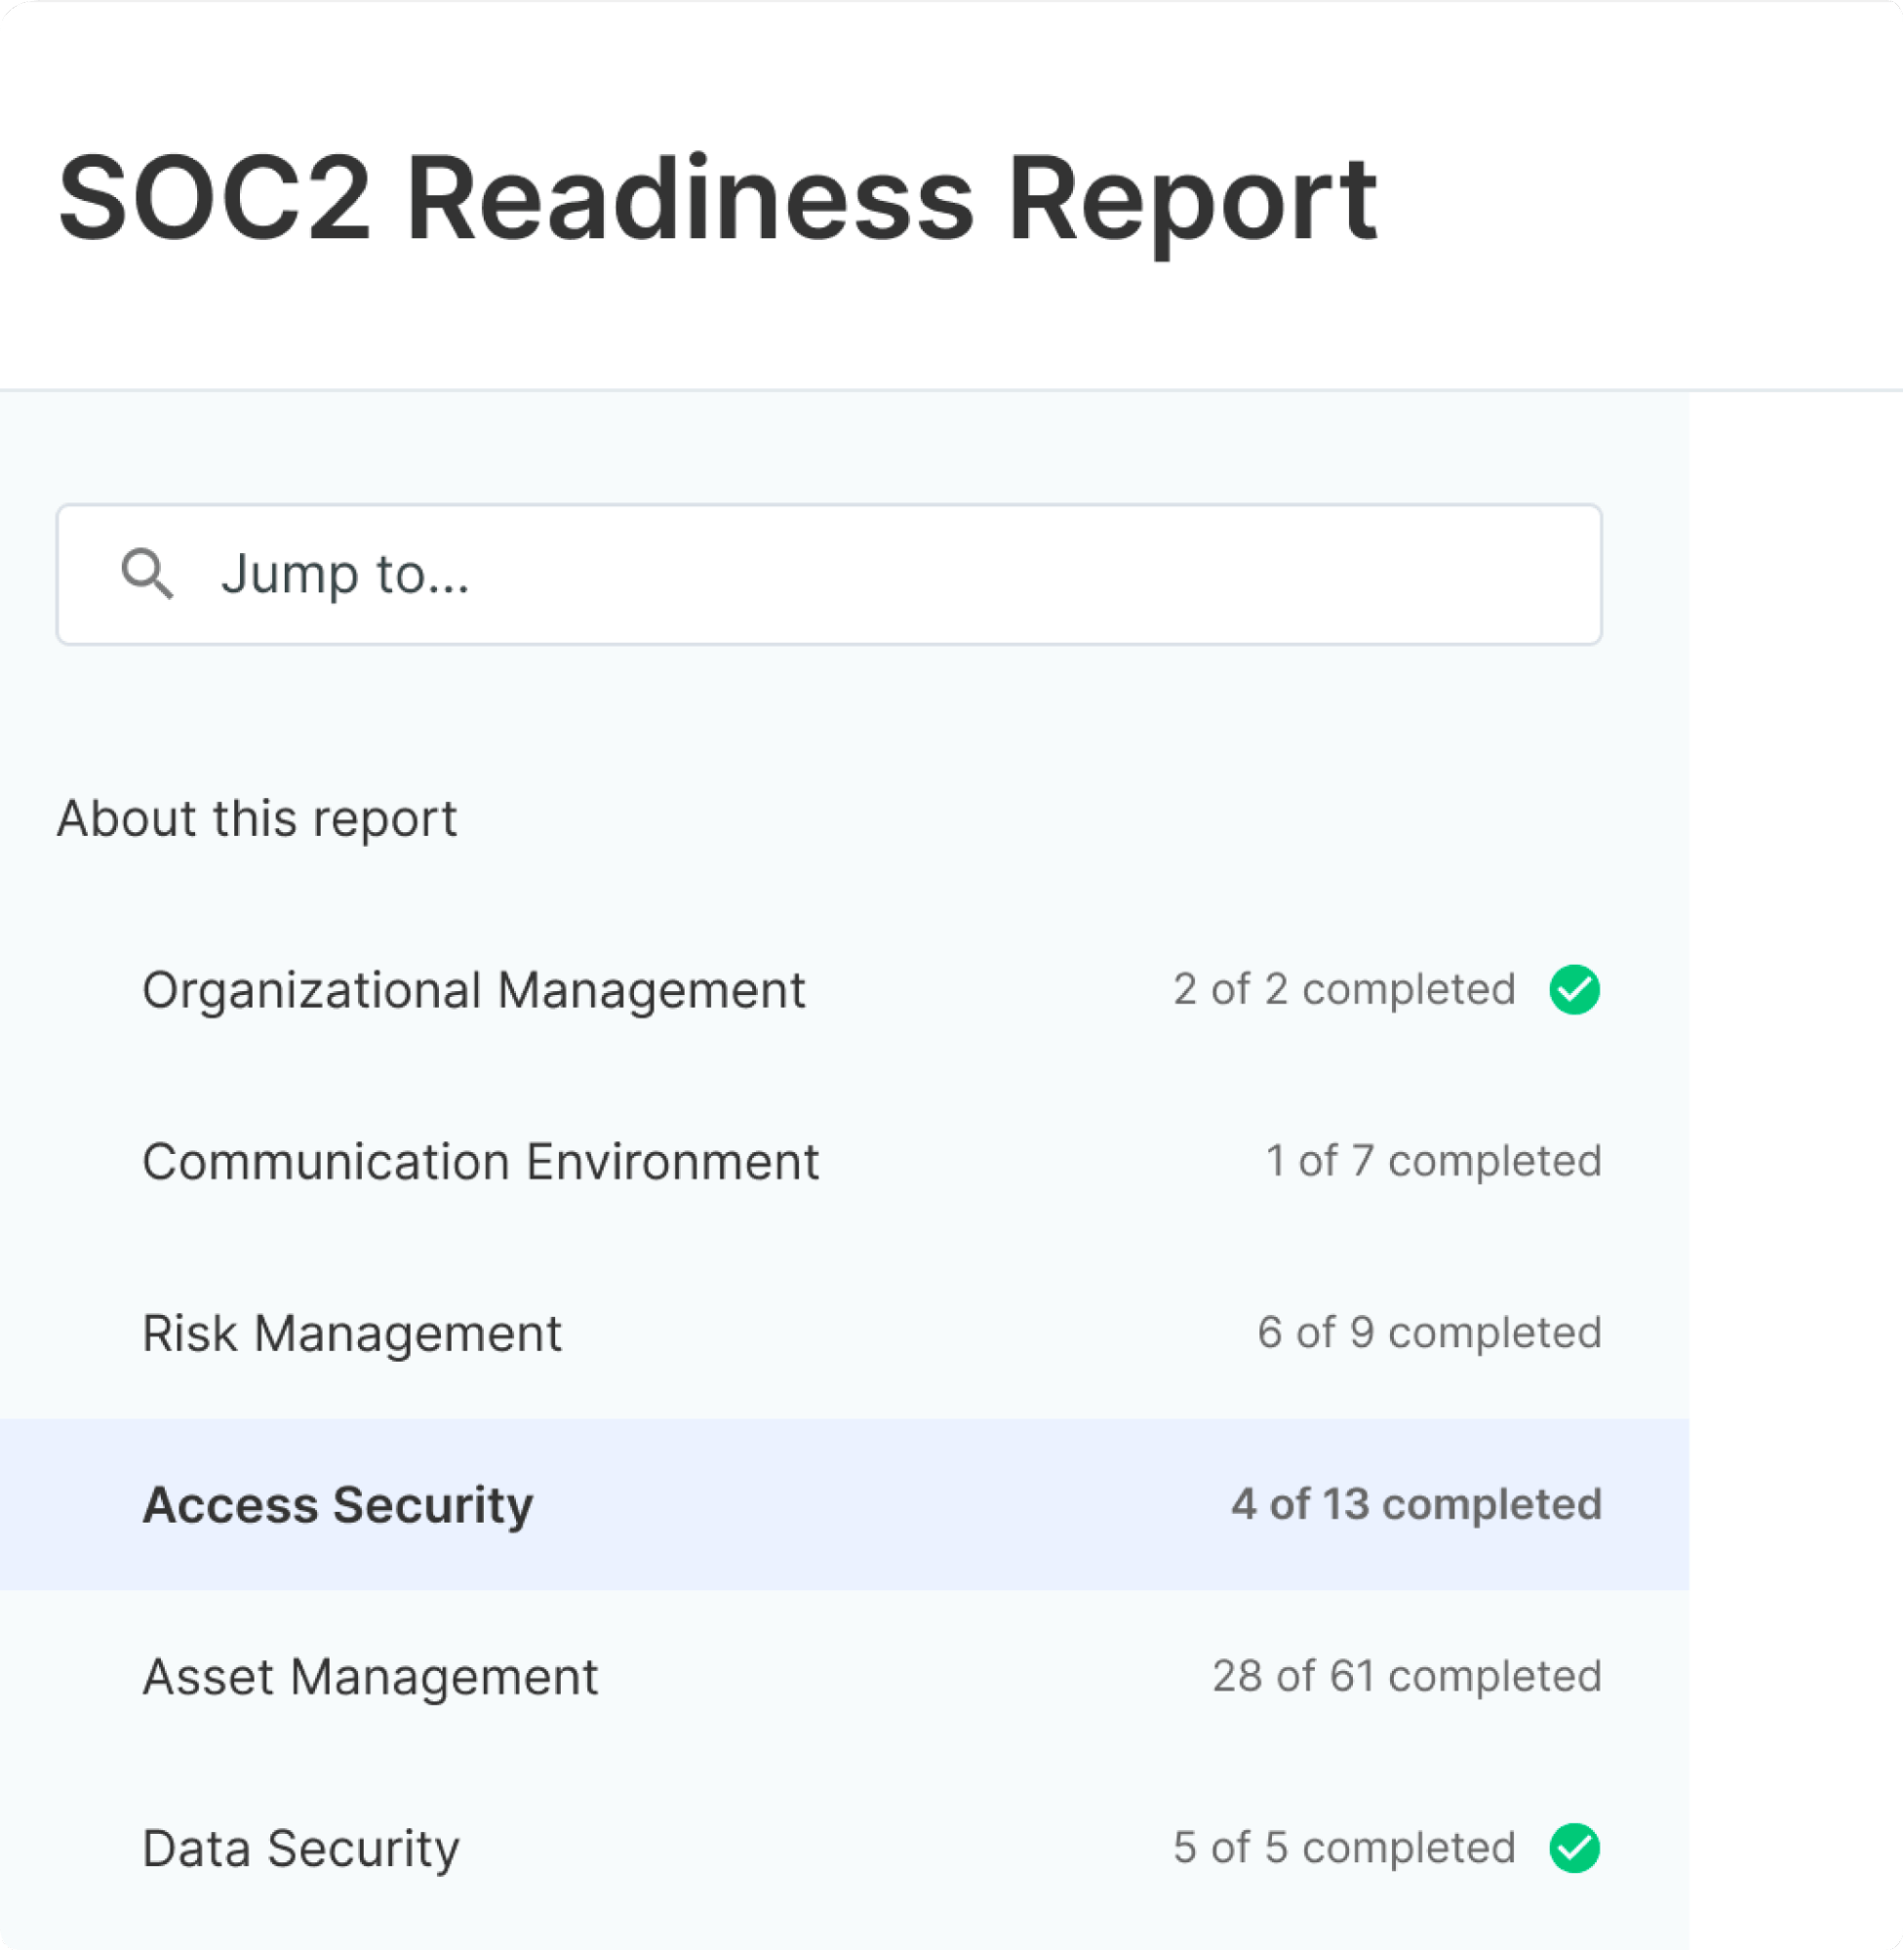 User viewing SOC 2 readiness report in Secureframe app